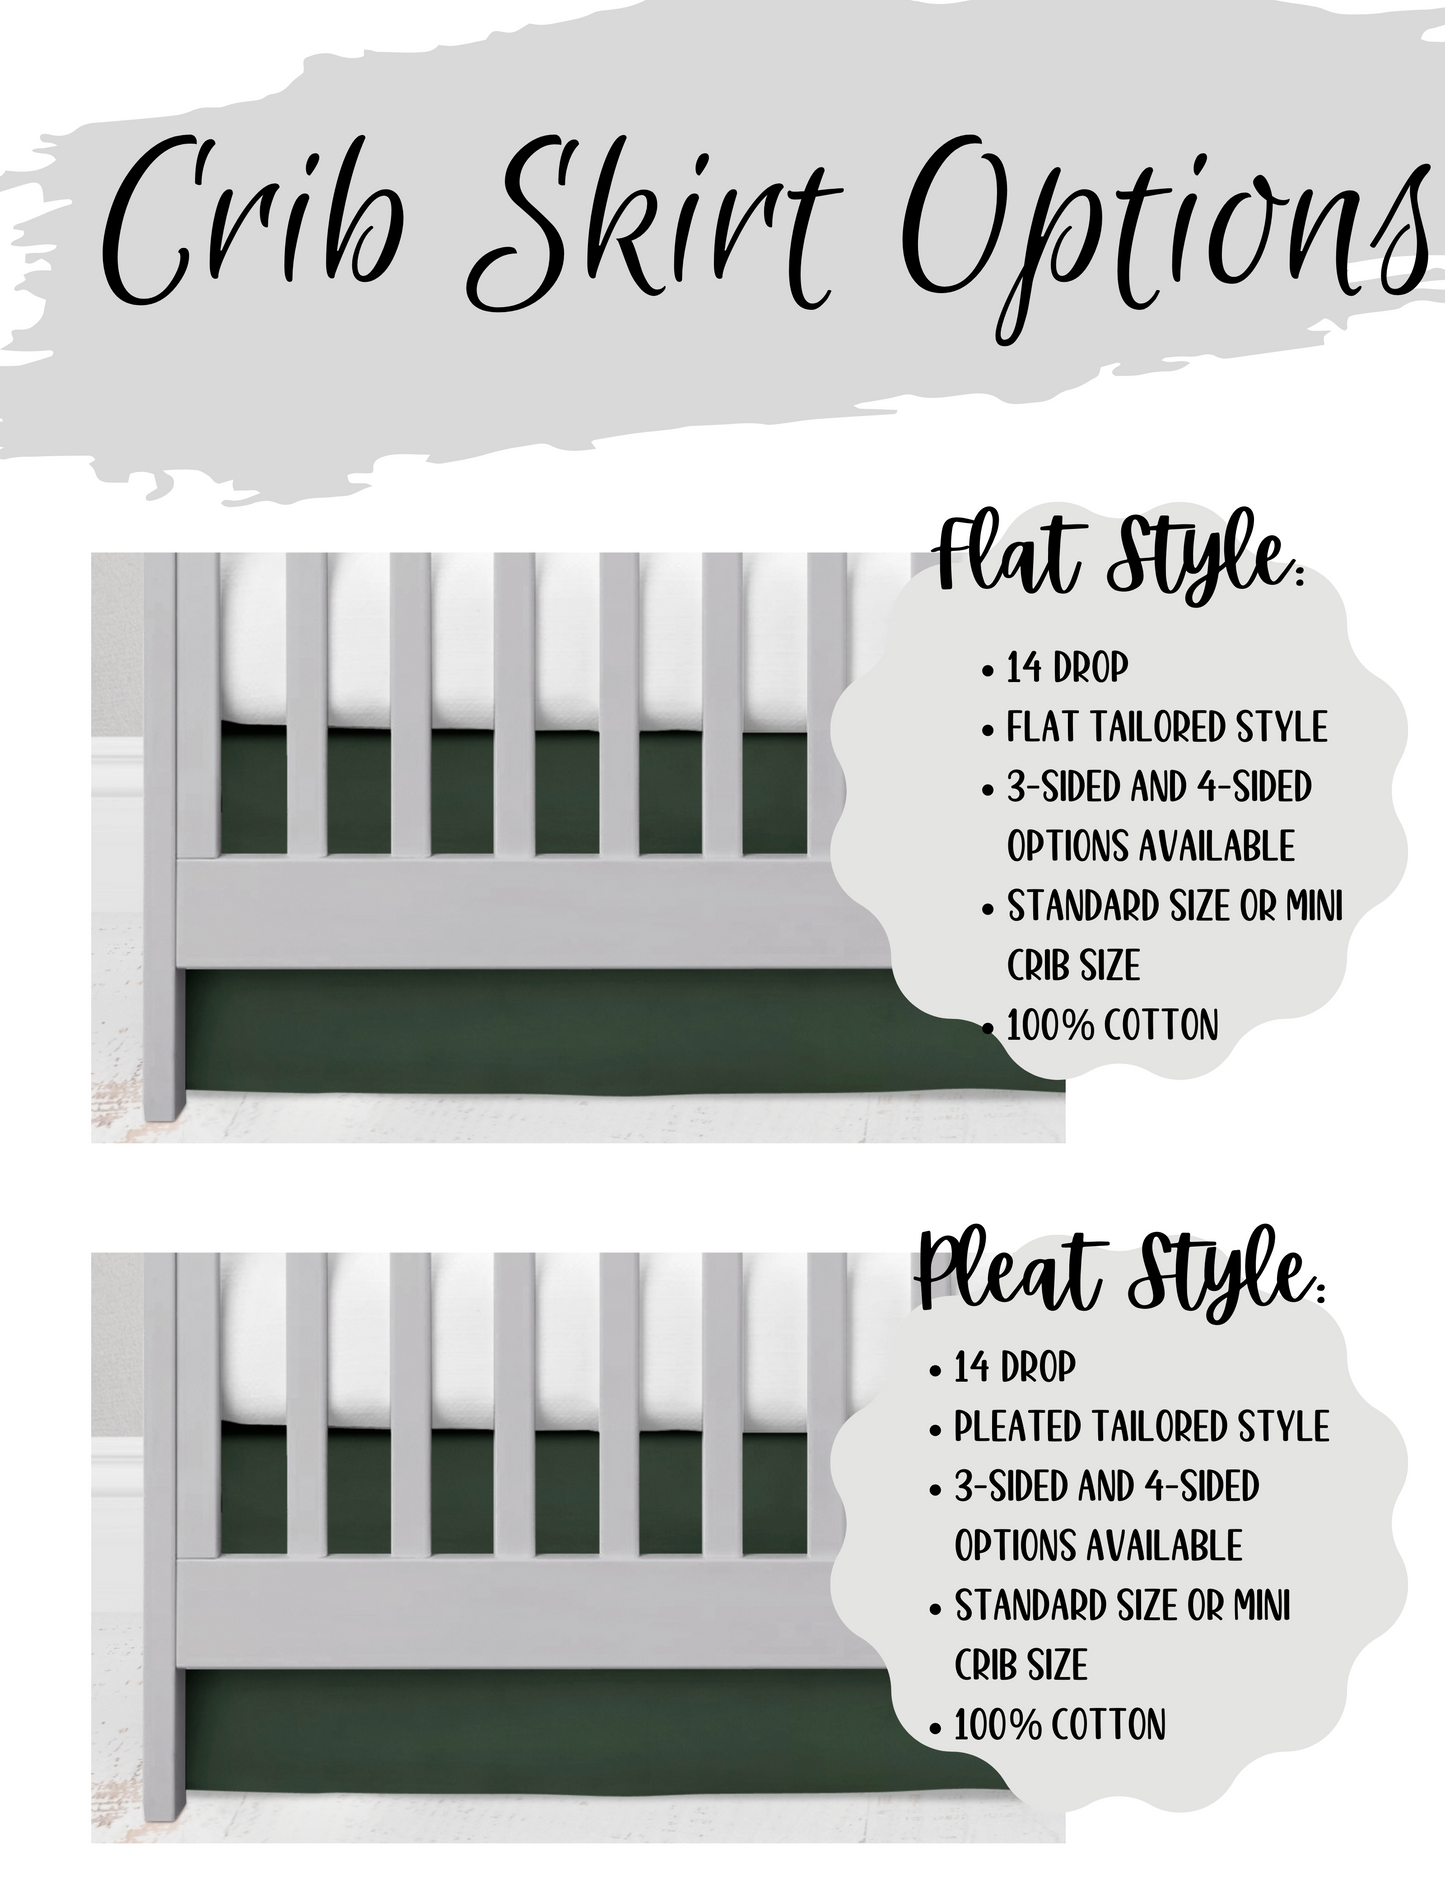 crib skirt options - available in flat & pleat